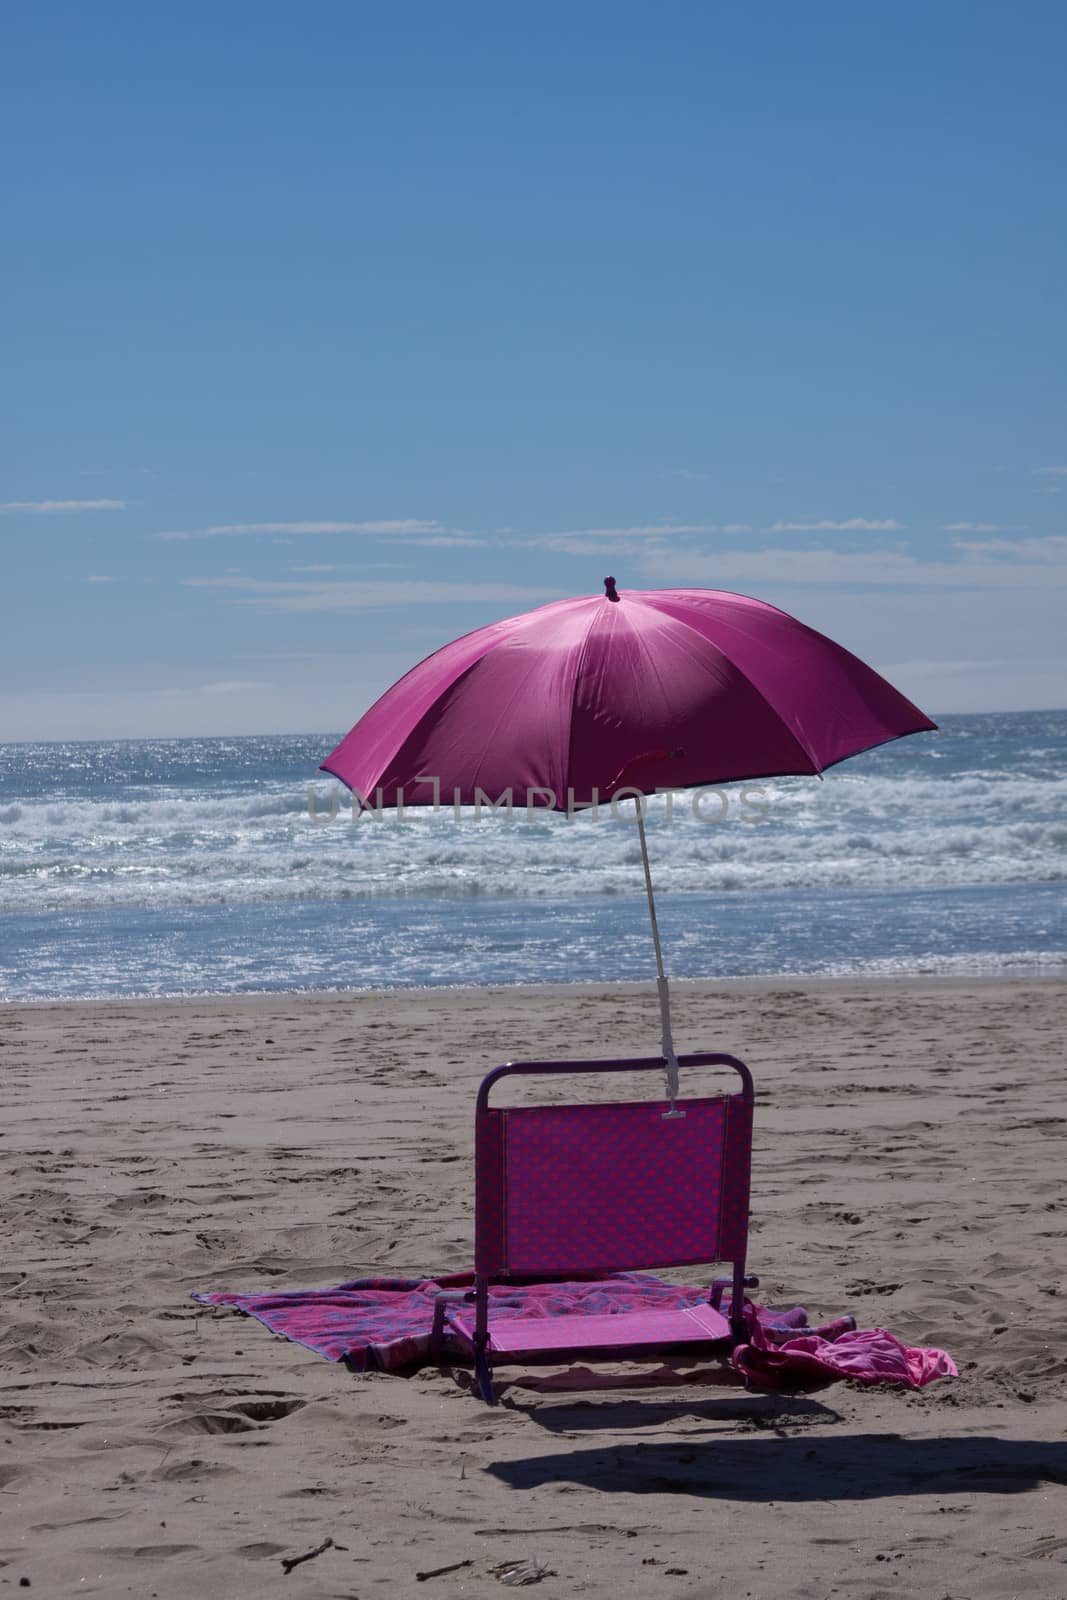 Time to relax on the beach in this beach chair and umbrella.